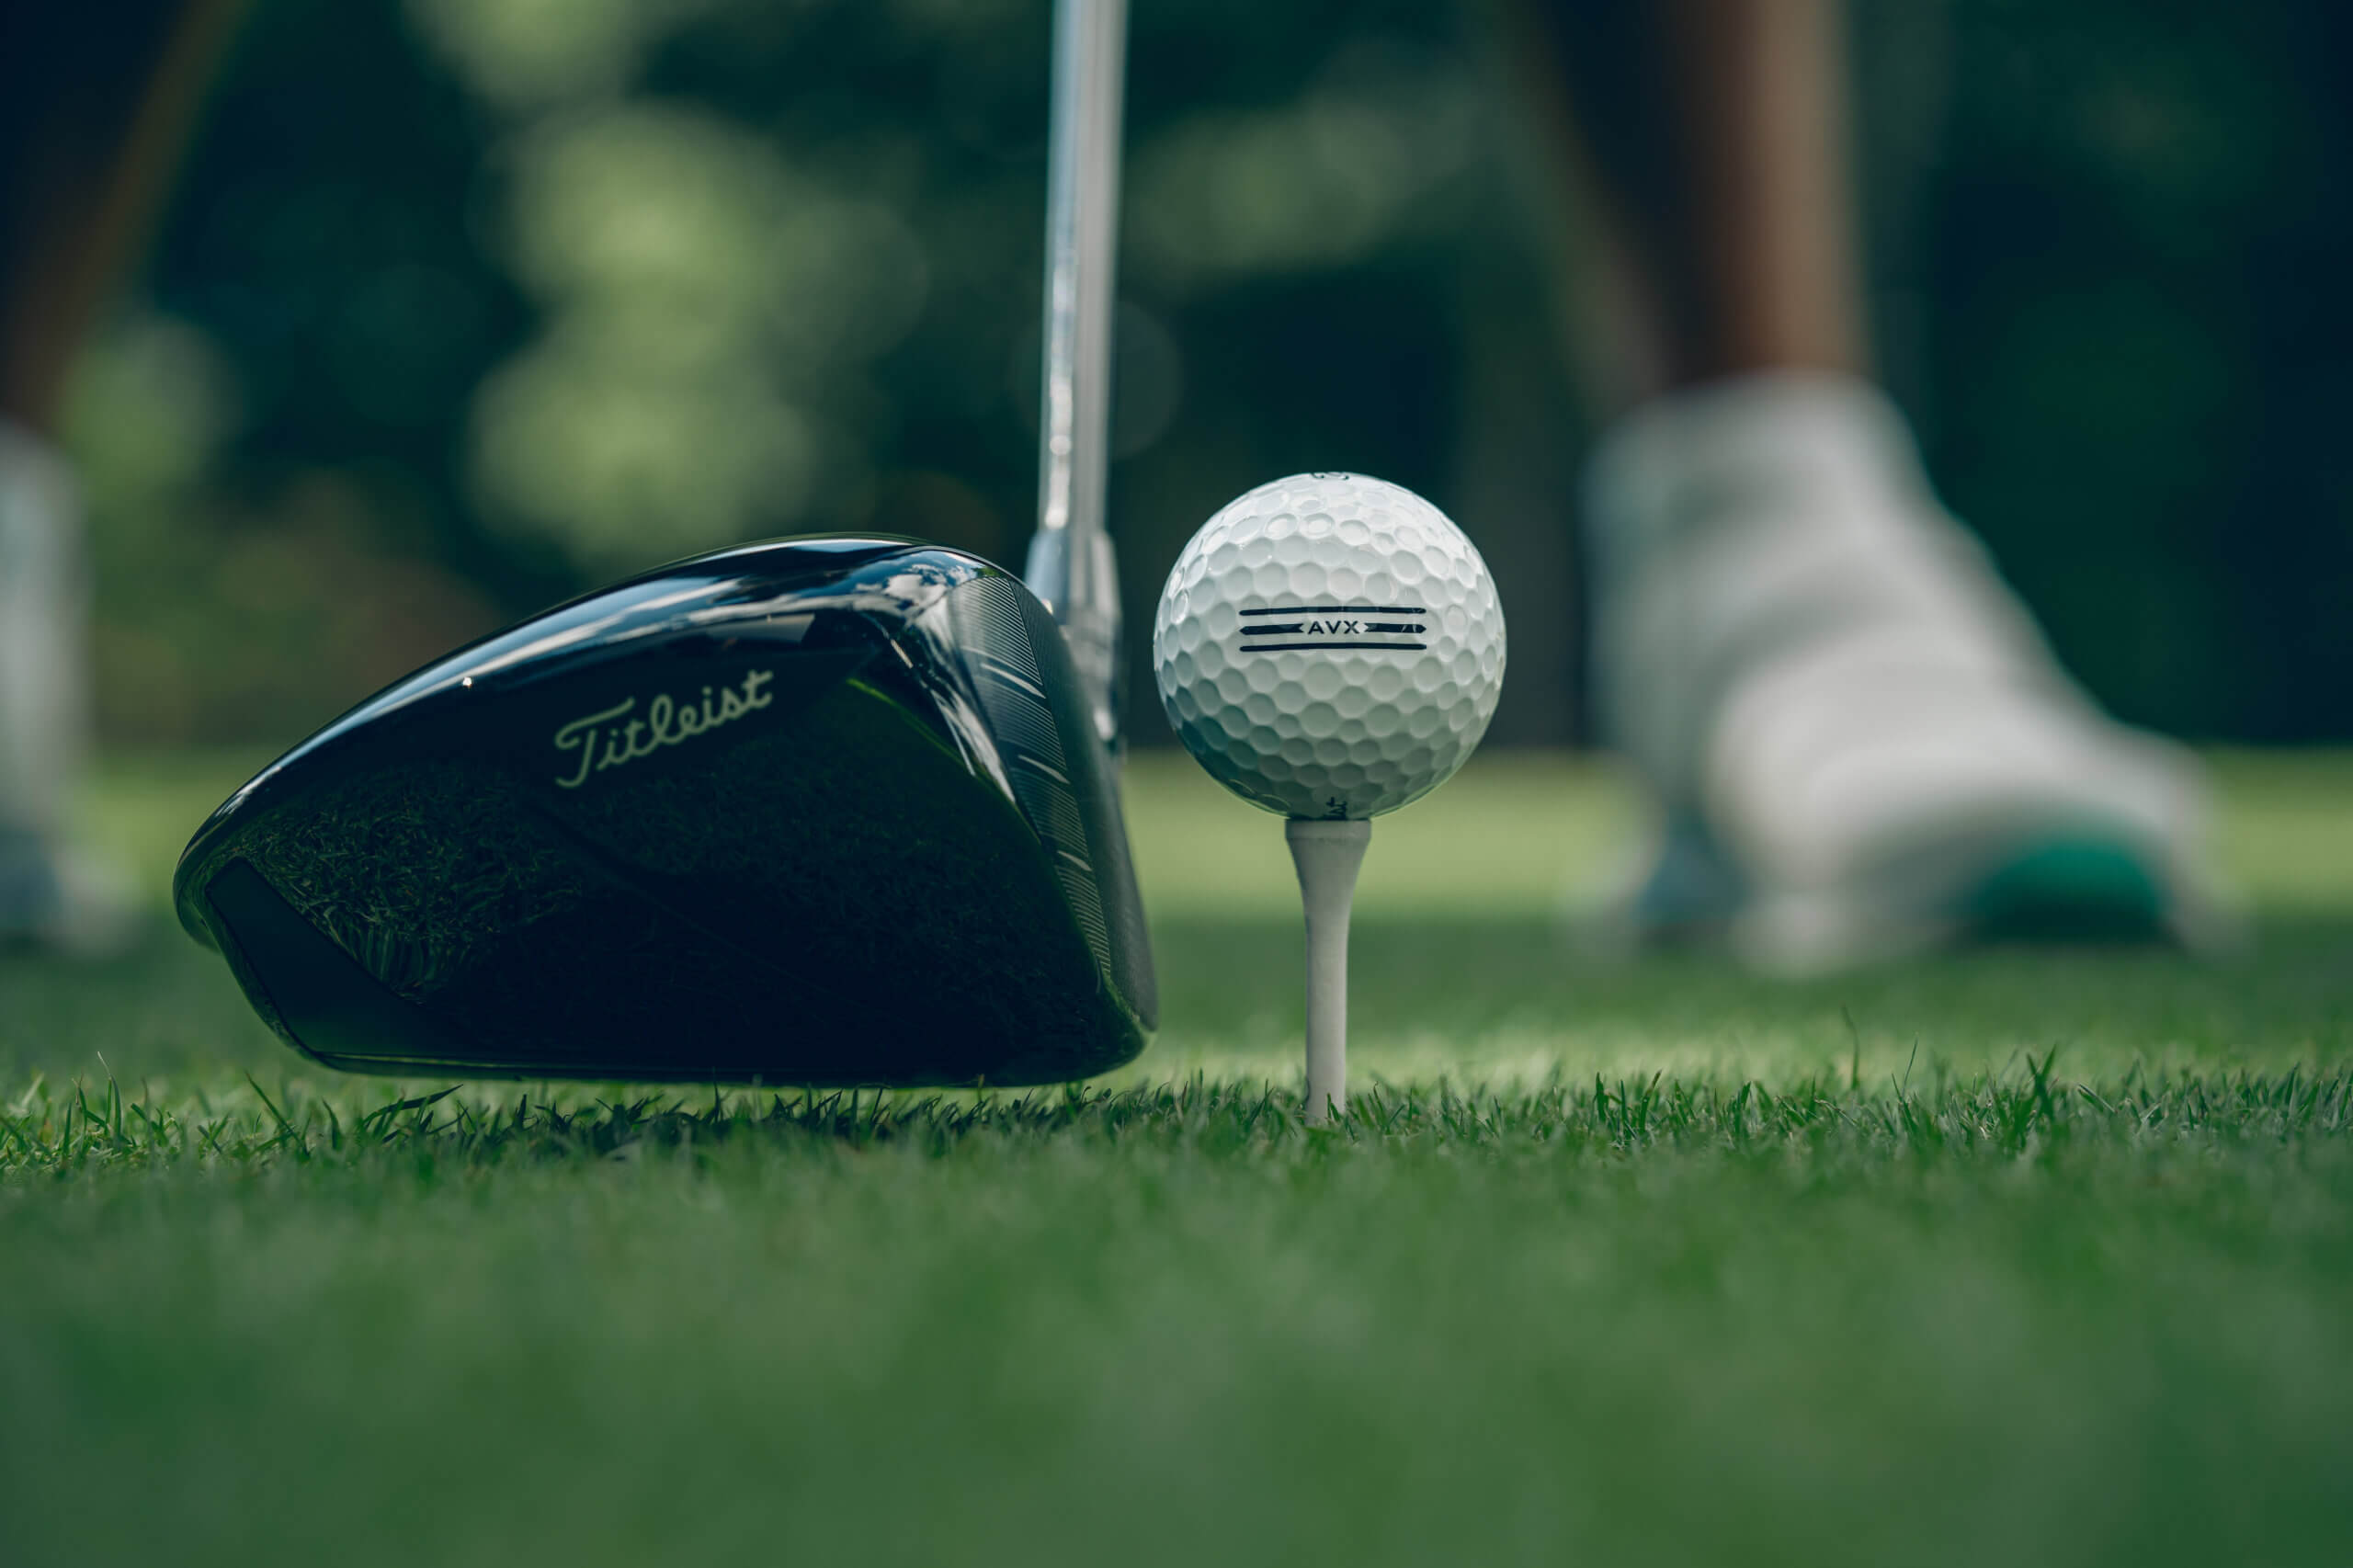 Titleist Golf Balls: Which Model is Best for Your Game?